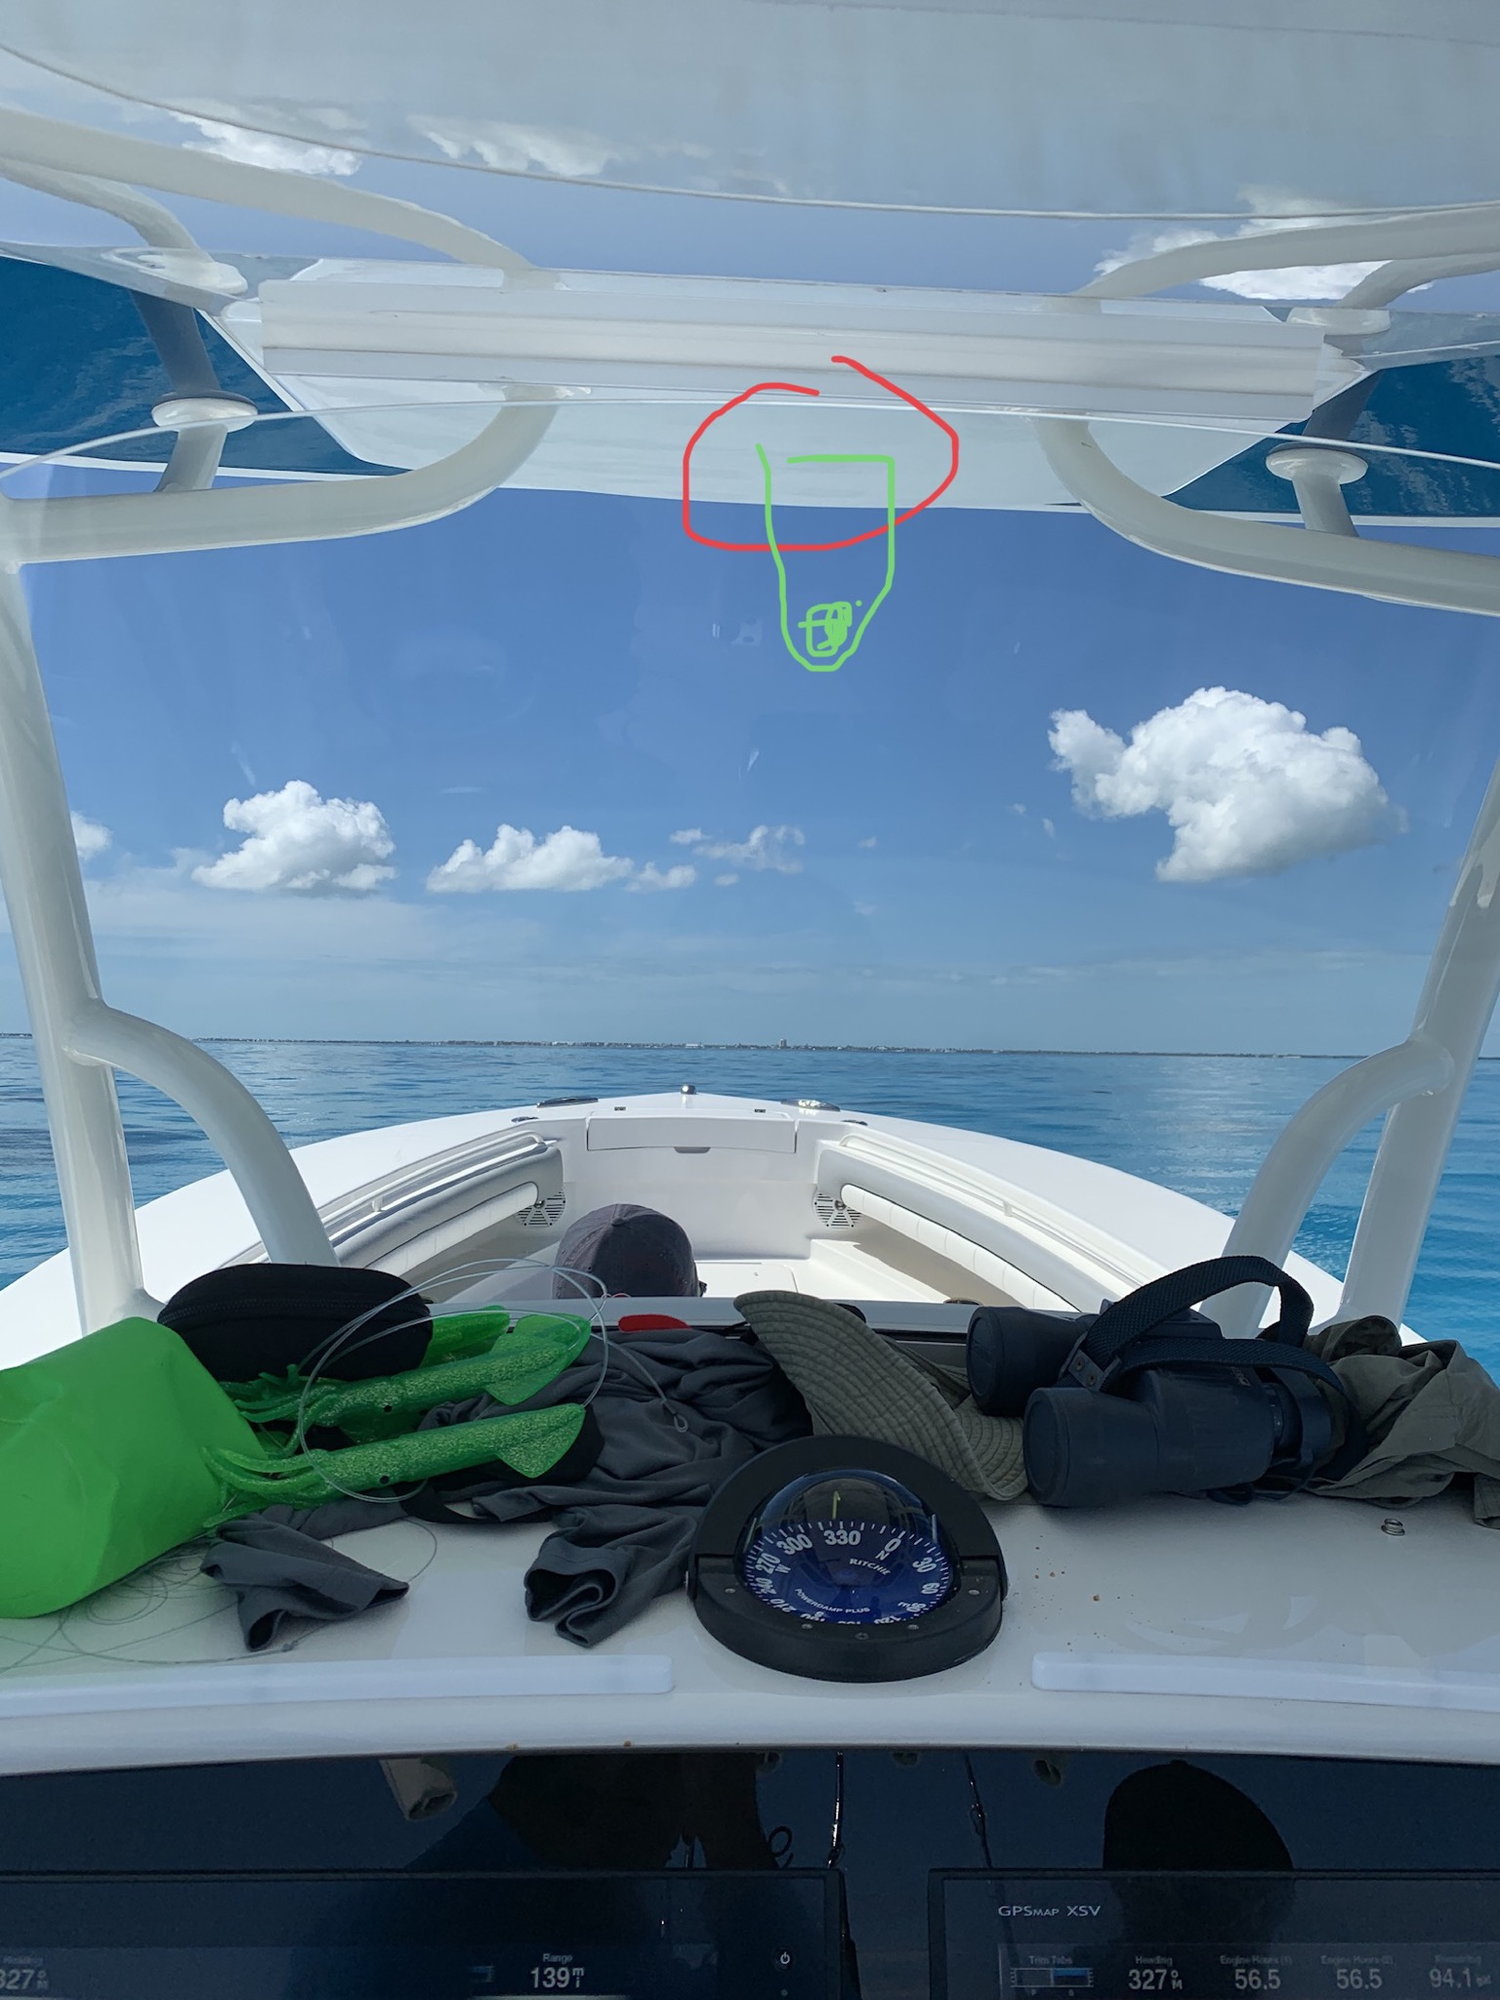 Flir md-625 lens damage? - The Hull Truth - Boating and Fishing Forum